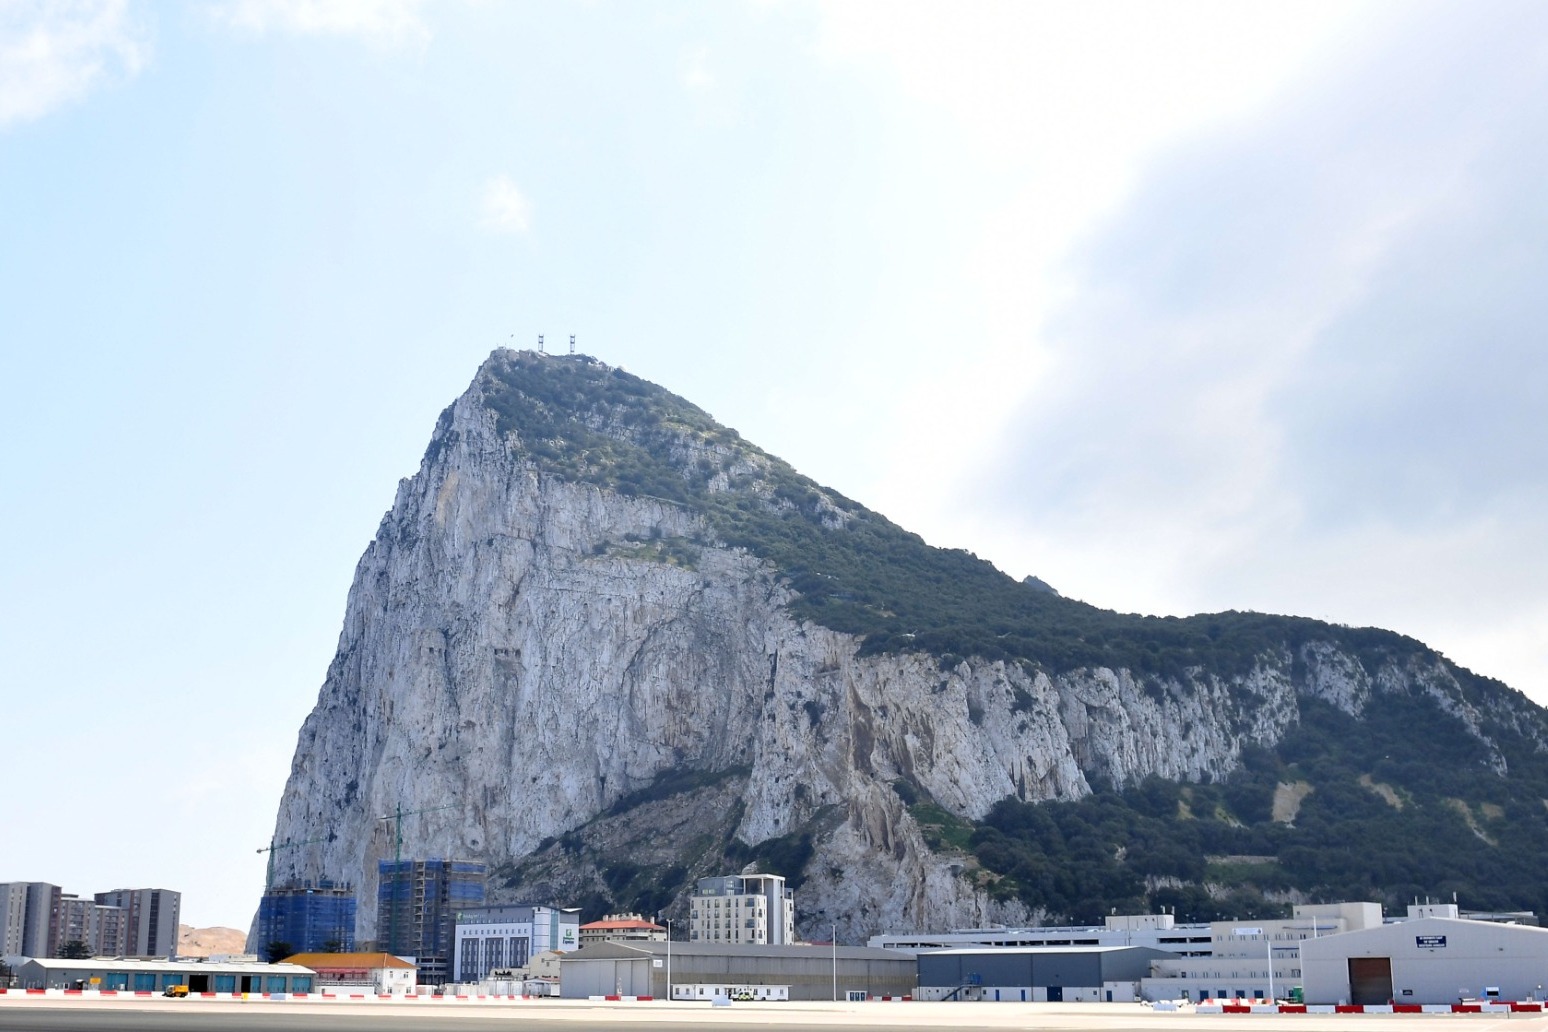 Gibraltar’s city status re-affirmed after 180-year absence from official lists 